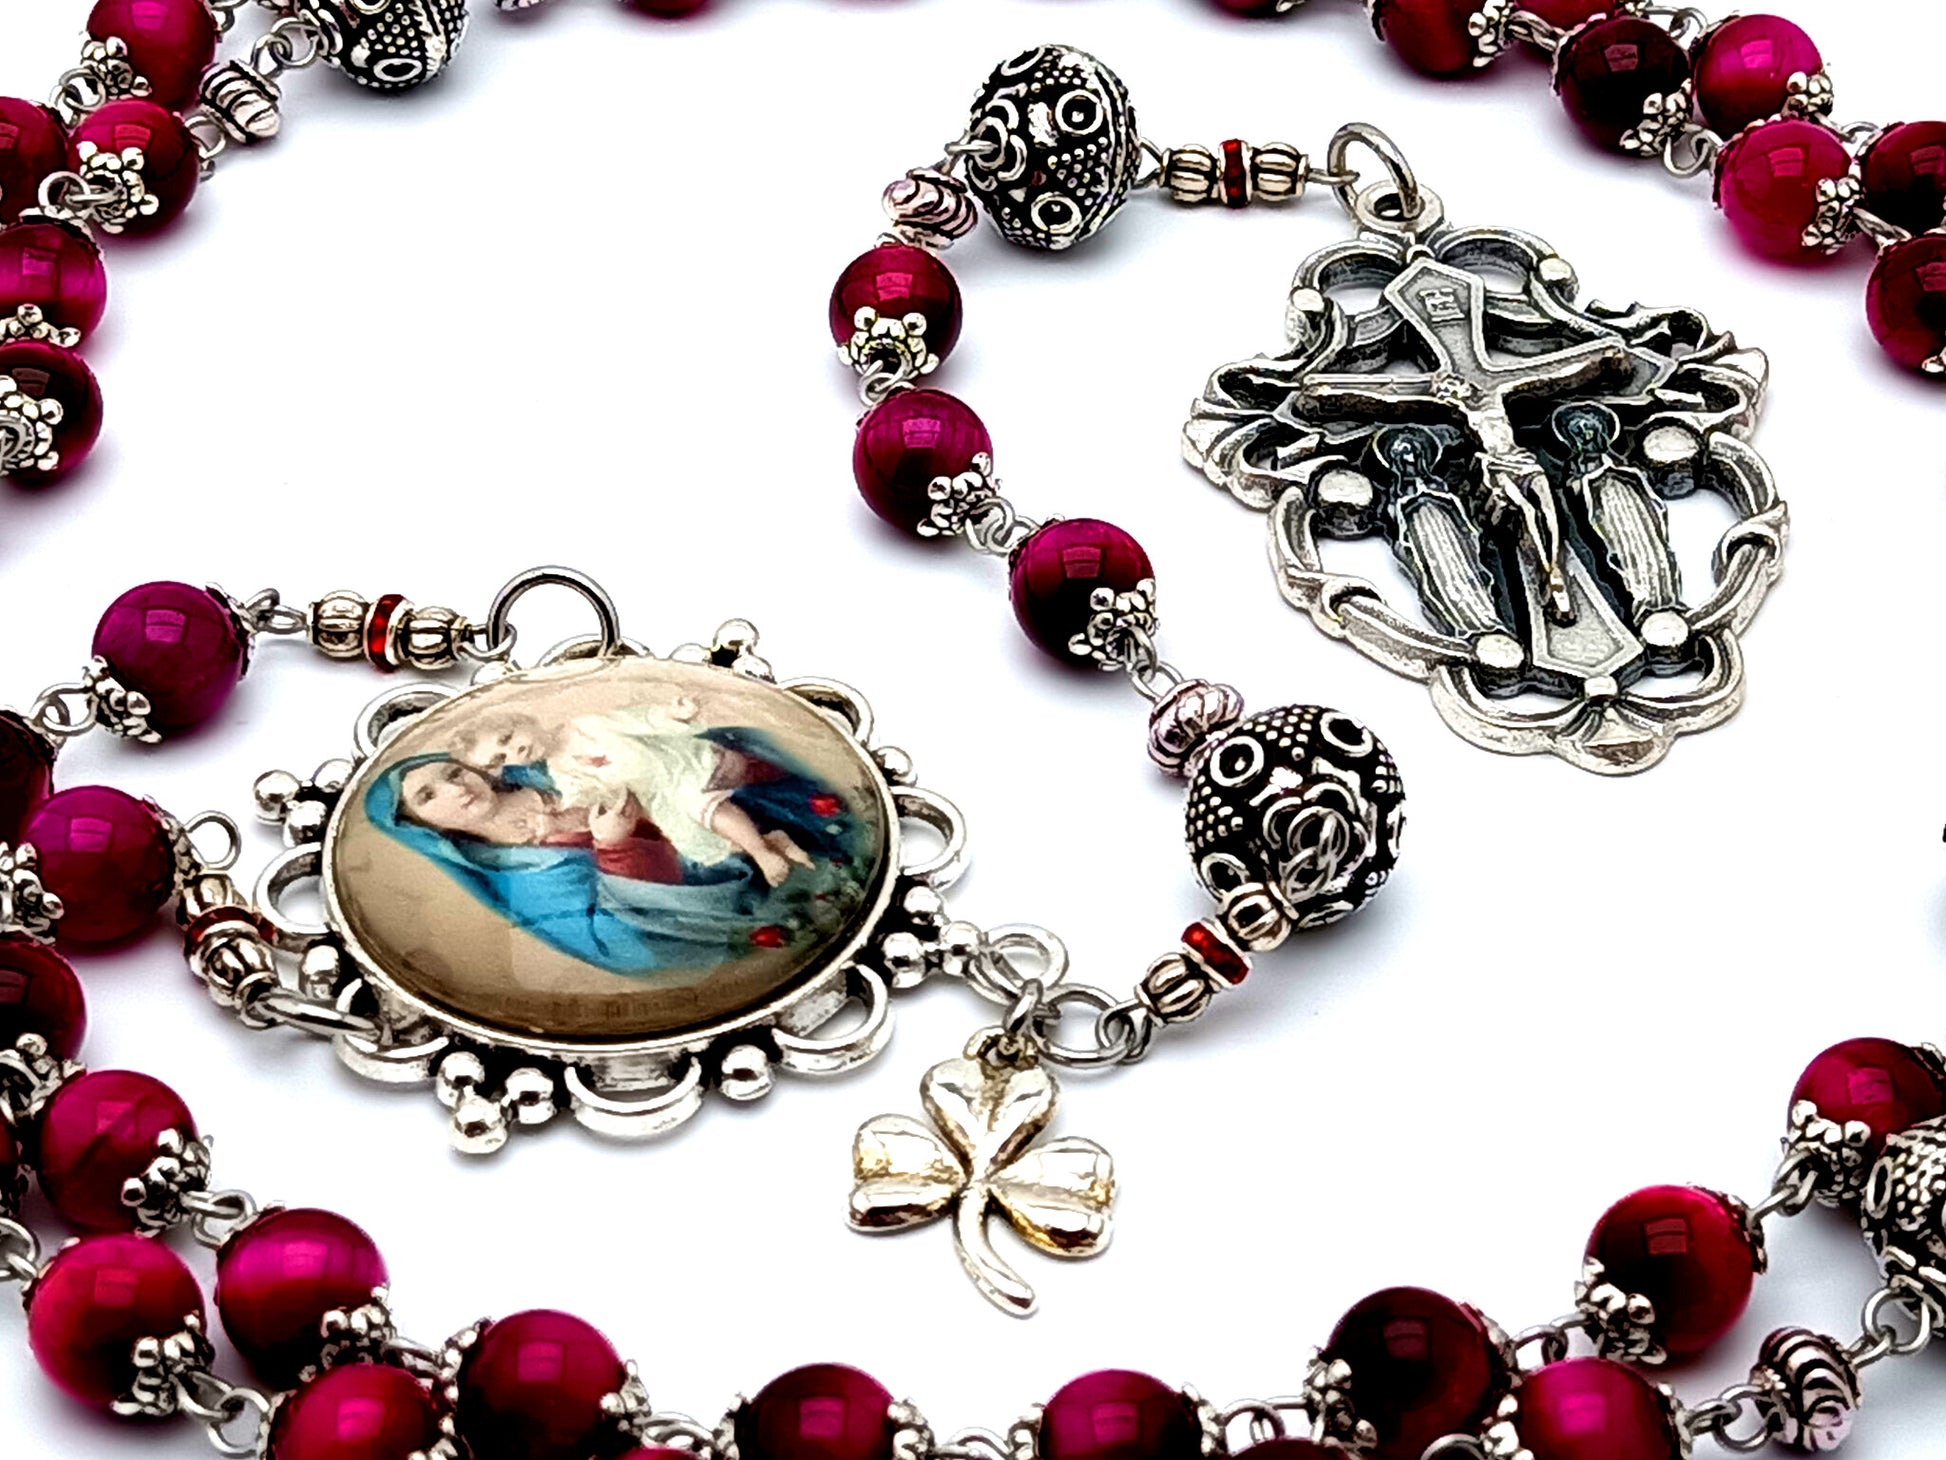 Virgin Mary and Child Jesus unique rosary beads with tigers eye gemstone and Tibetan silver beads and Angel crucifix and Trinity clover leaf medal.